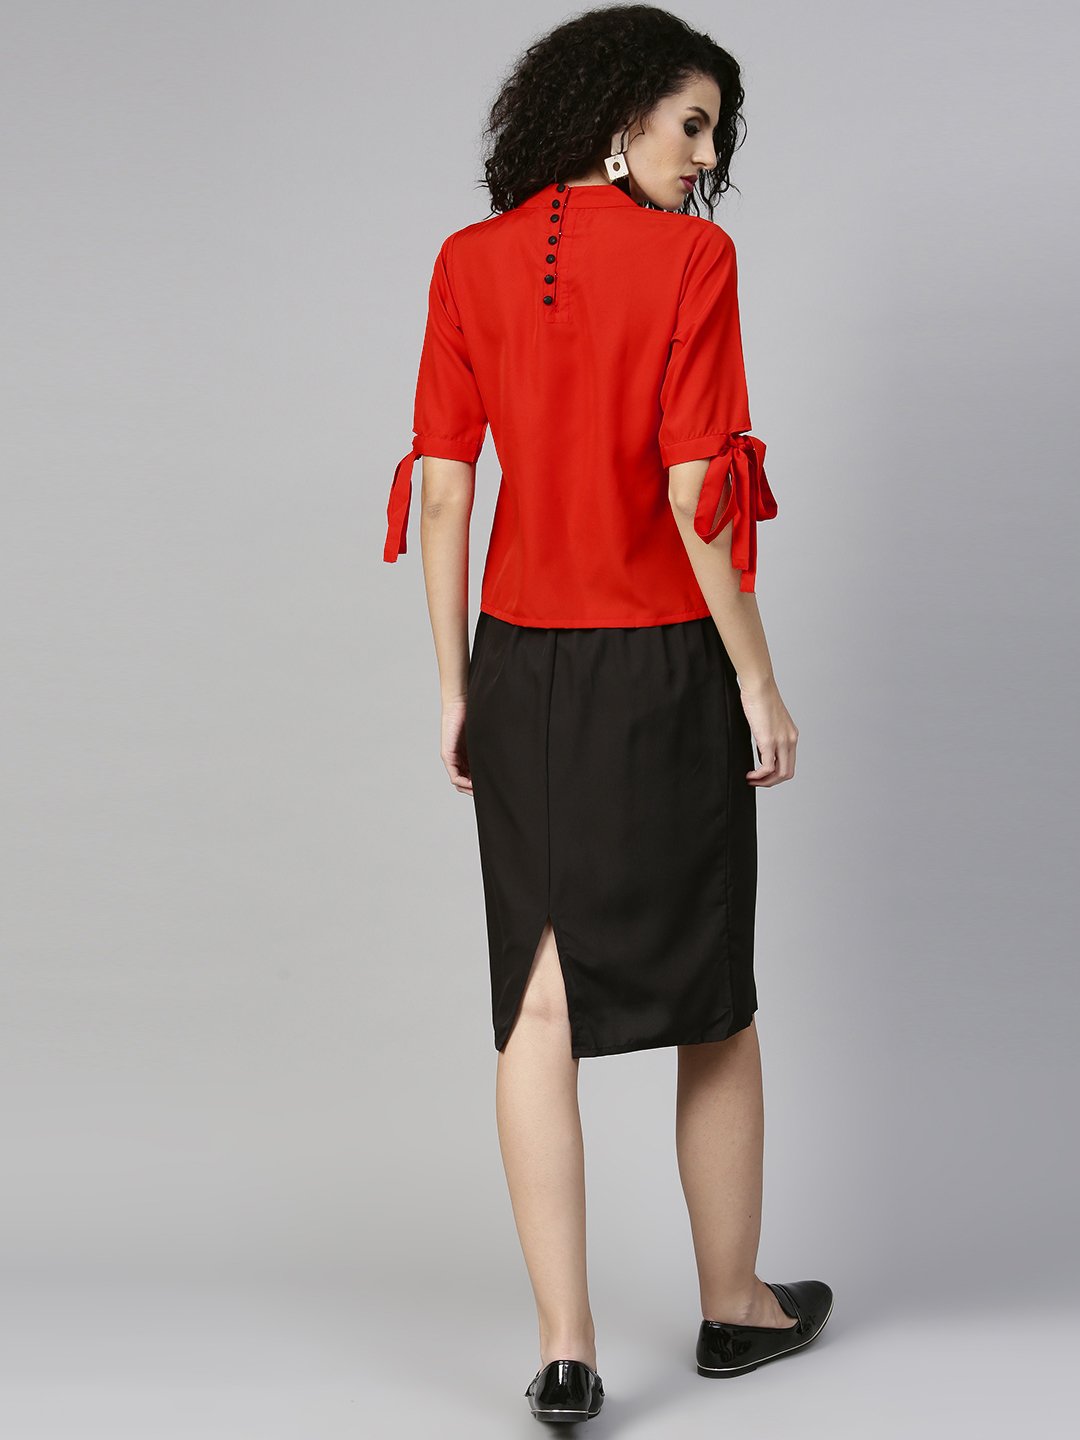 Women's Orange & Black Solid Top With Skirt - Nayo Clothing